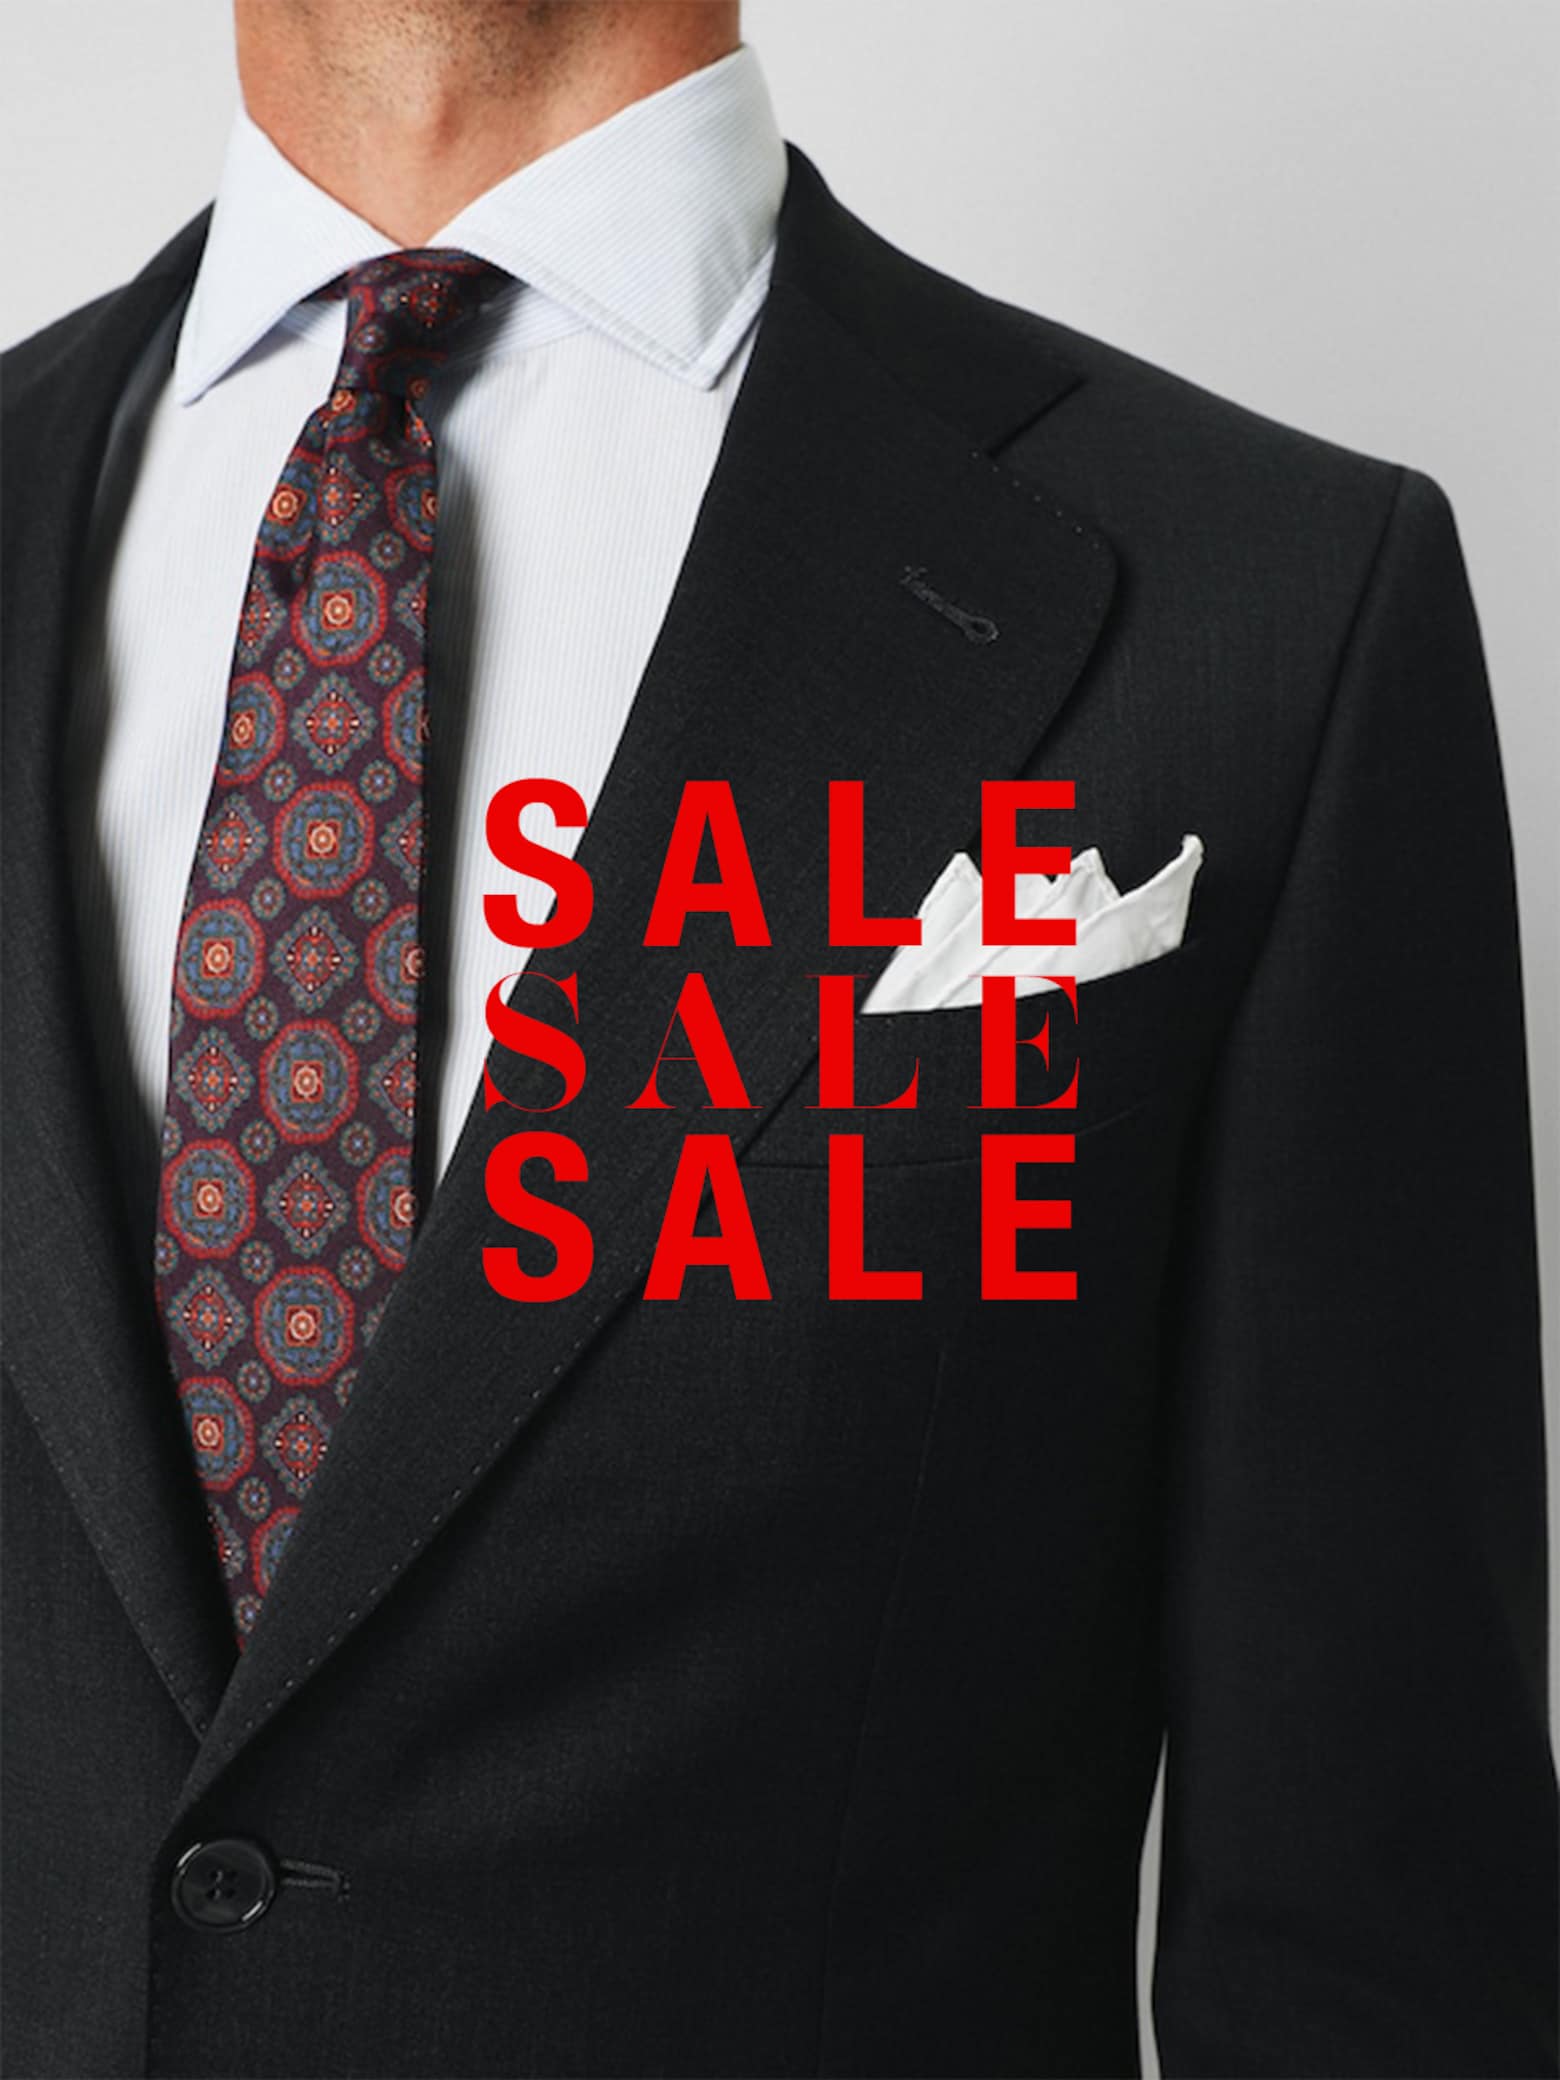 Save money now ! Suits